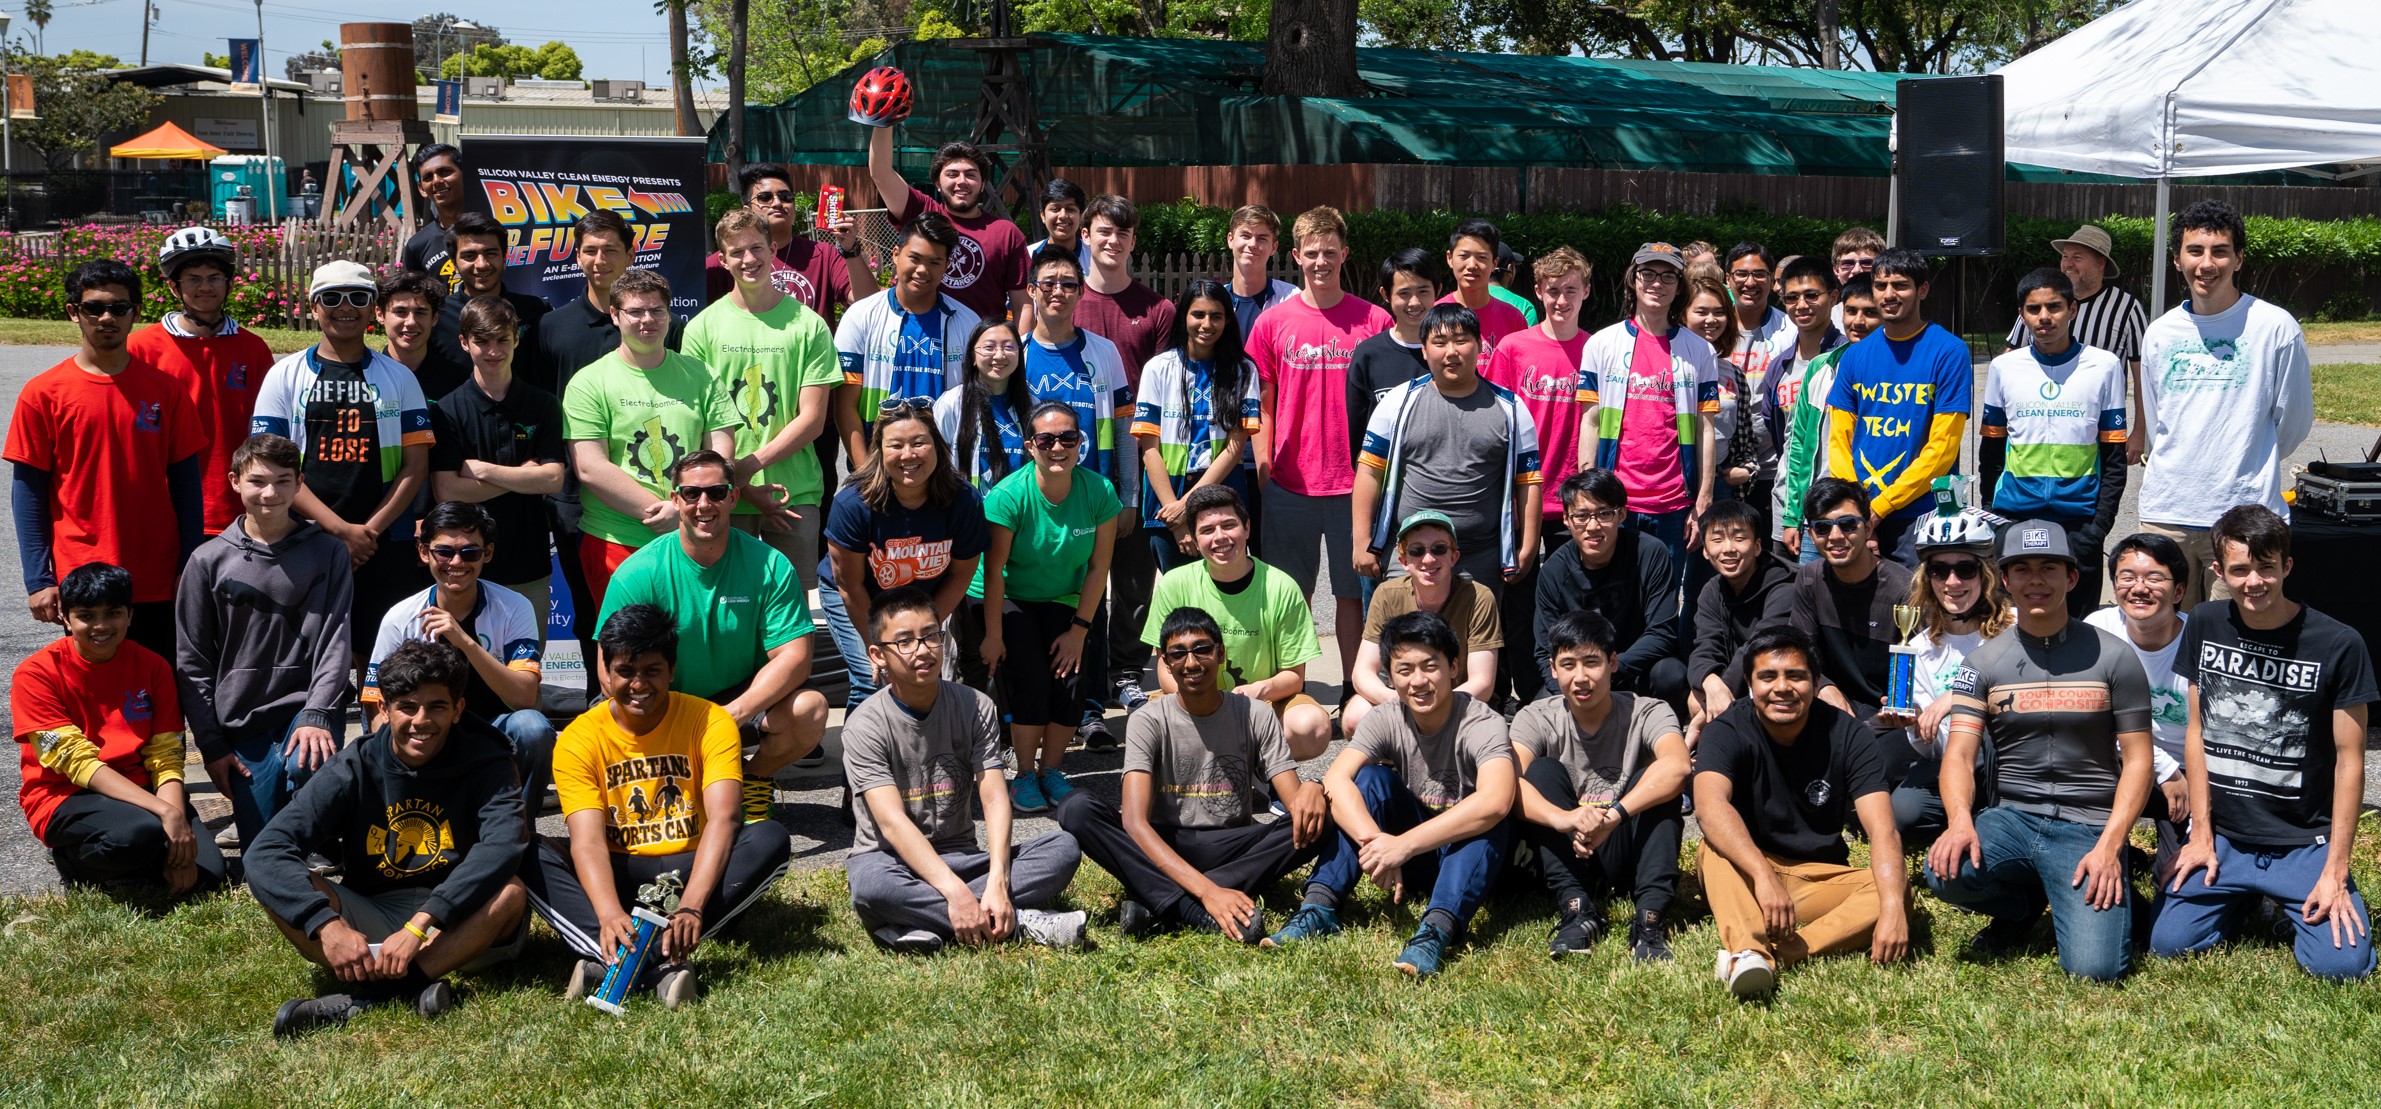 All of the bike to the future 2019 participants